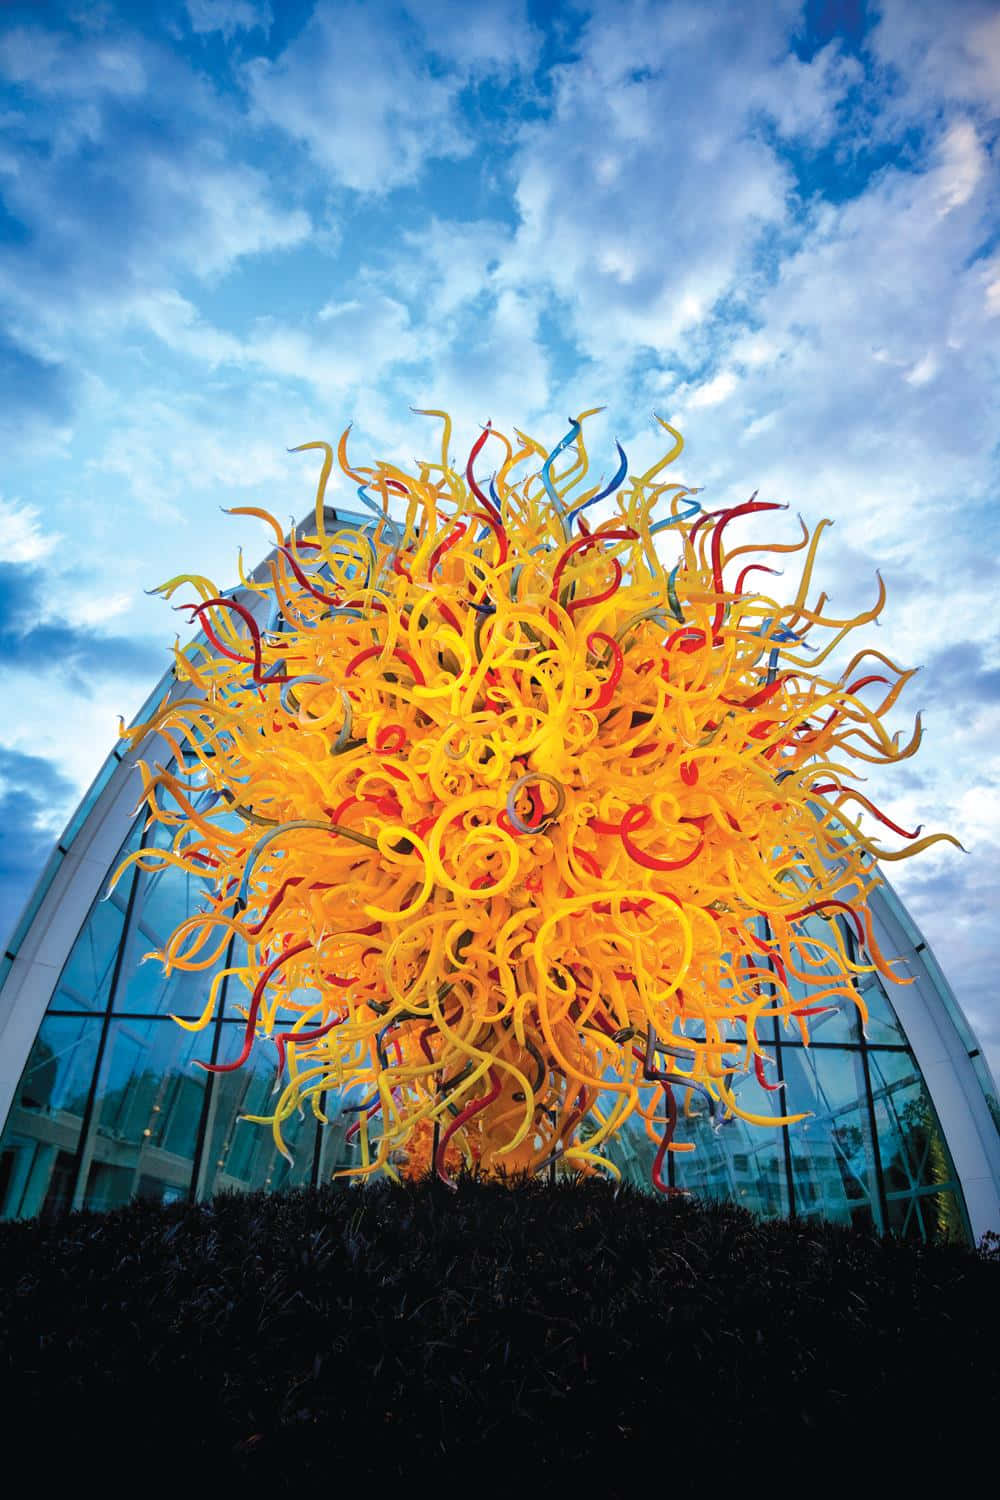 Chihuly Glass Sculpture Under Blue Sky Wallpaper